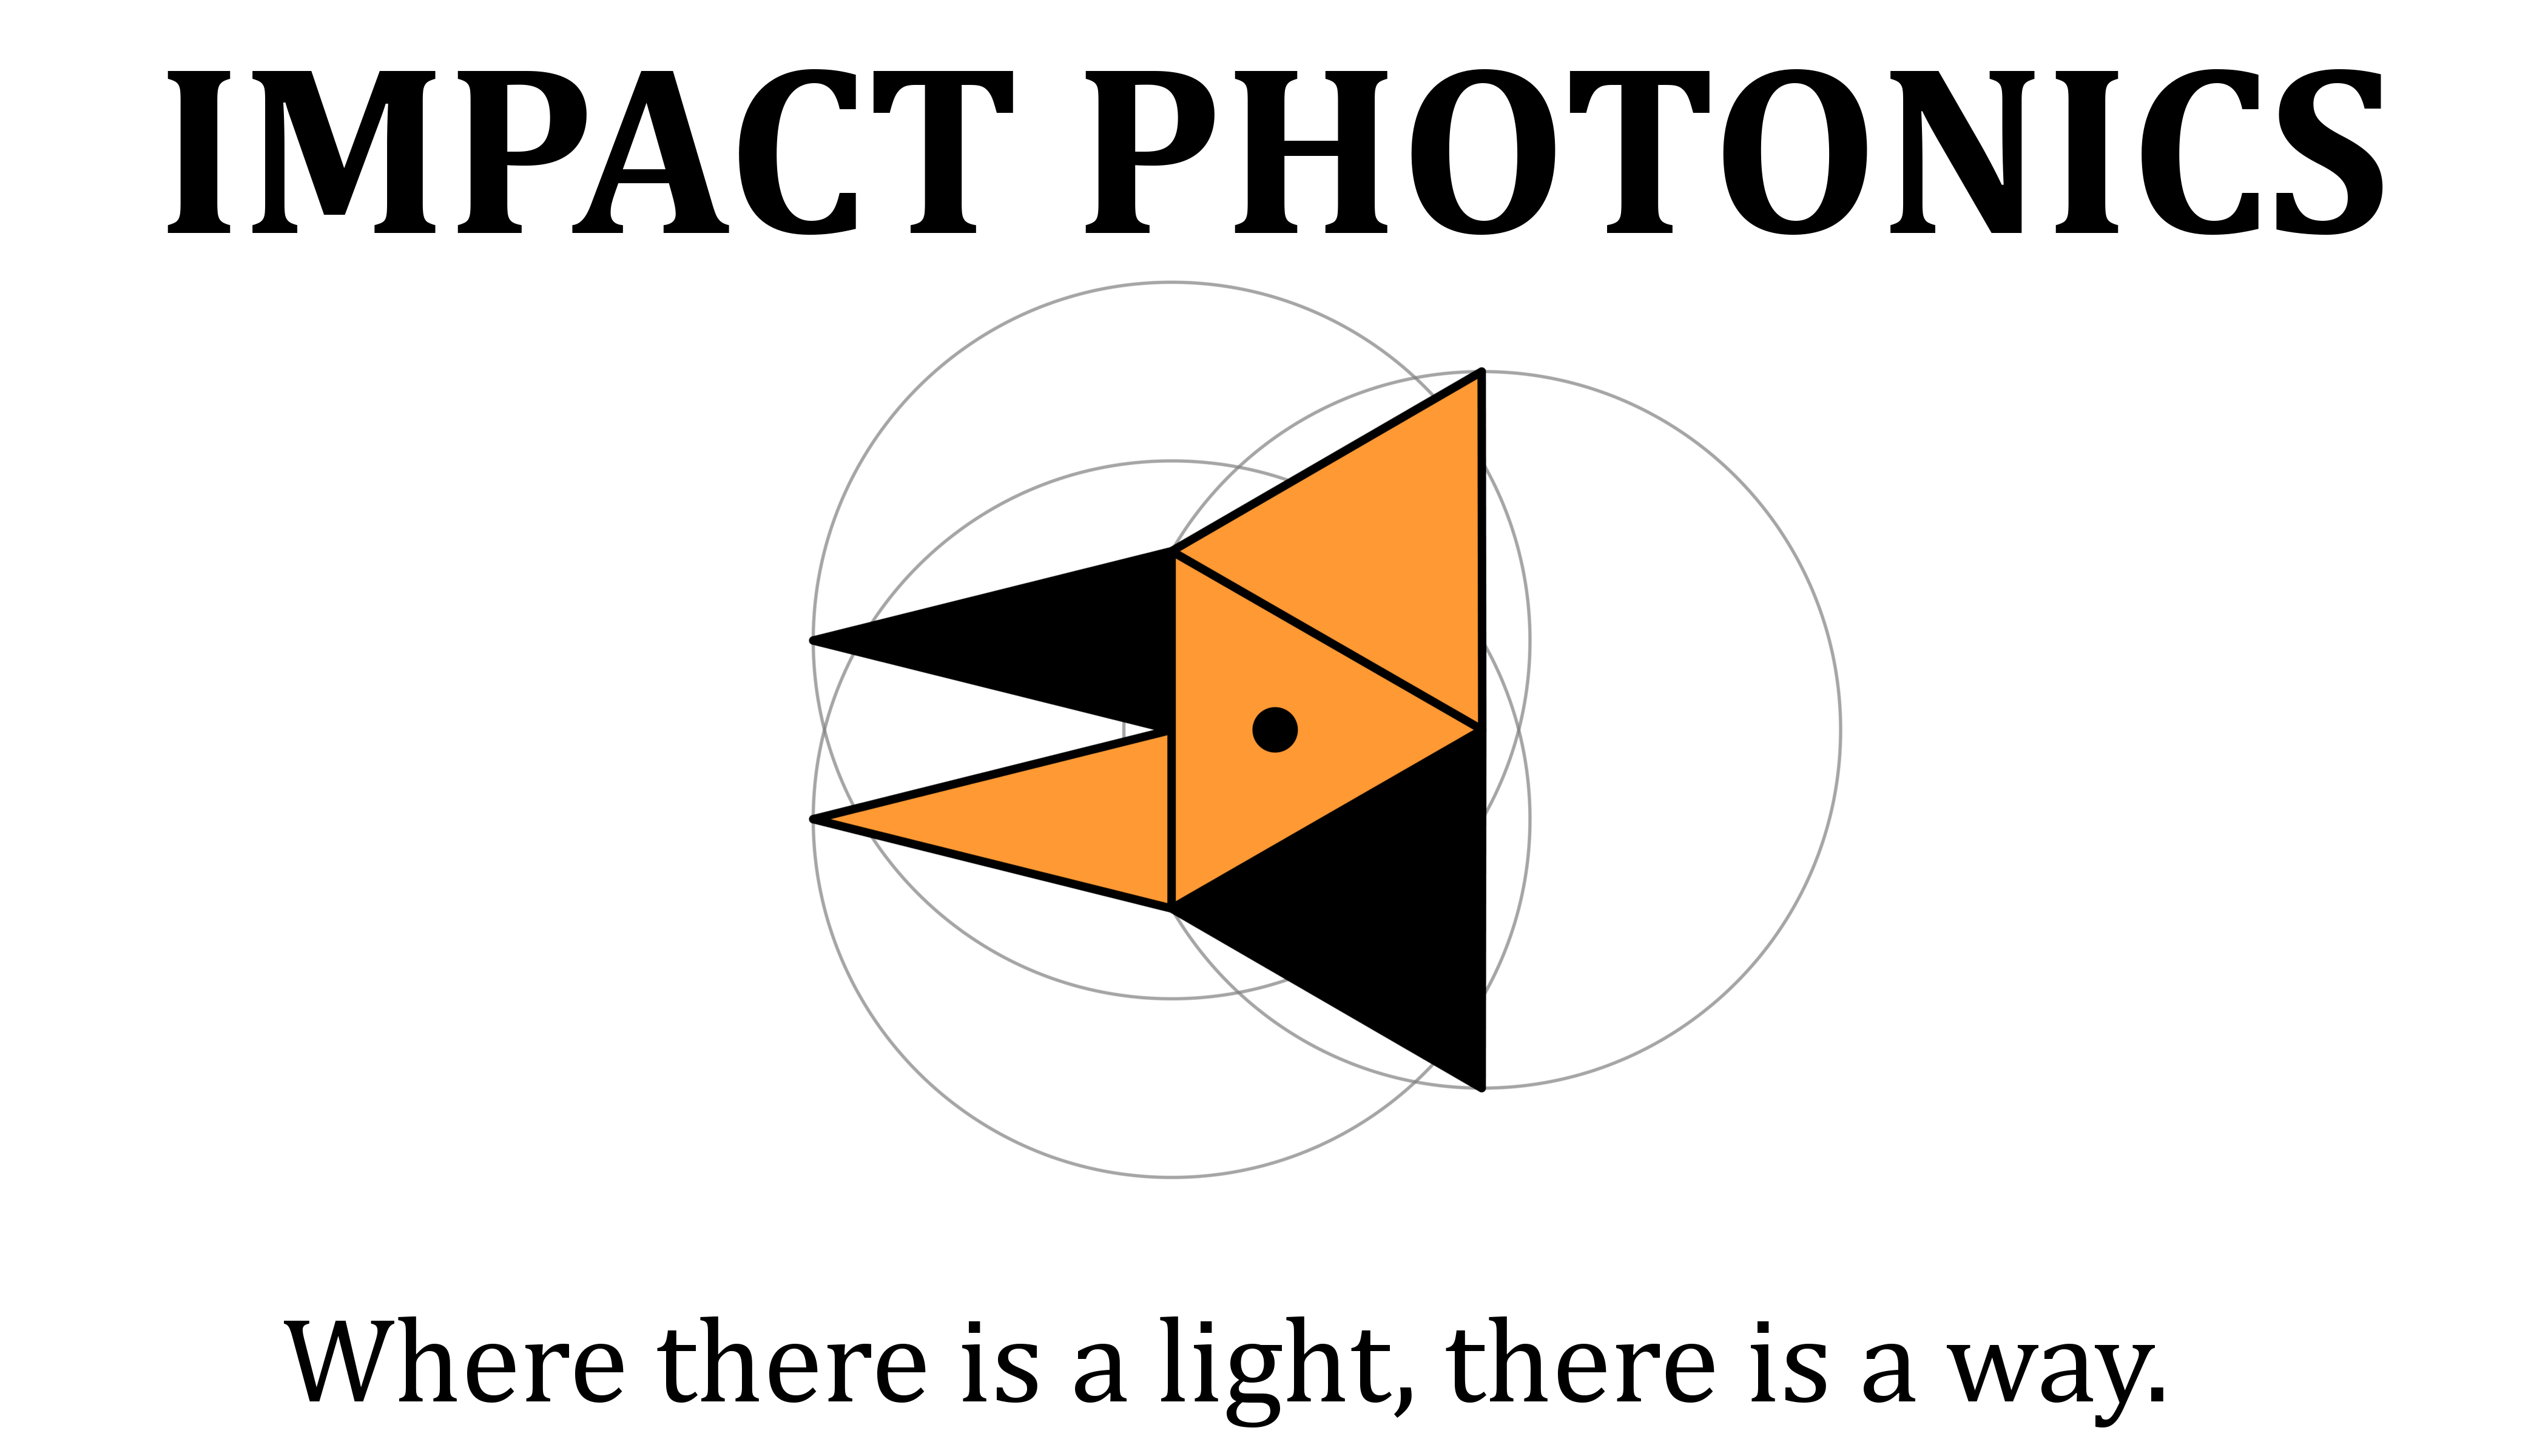 Impact Photonics – Where there is a light, there is a way